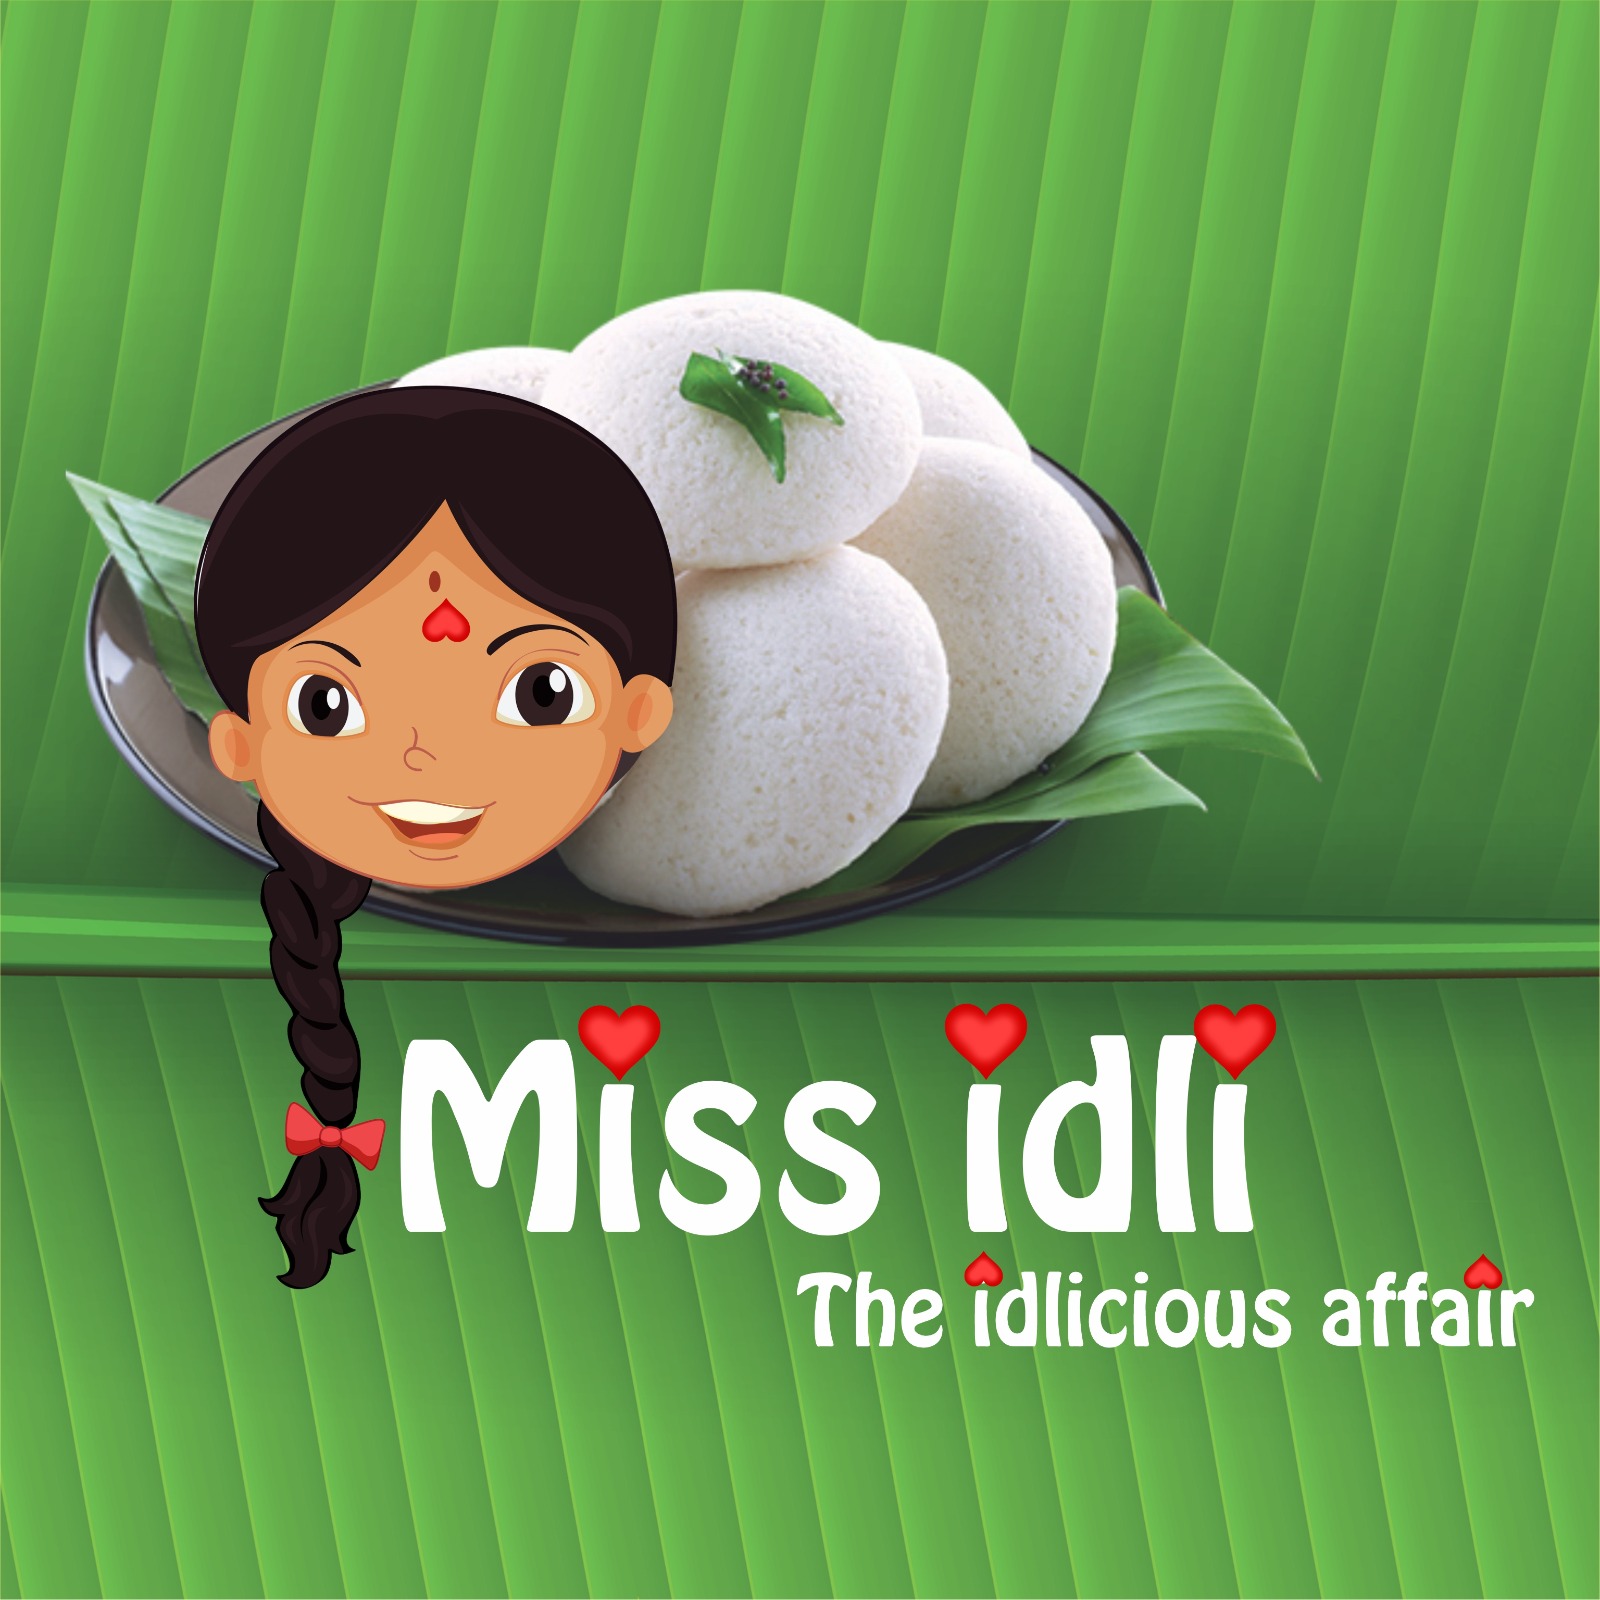 About Us – Delicious Ammas Idli!